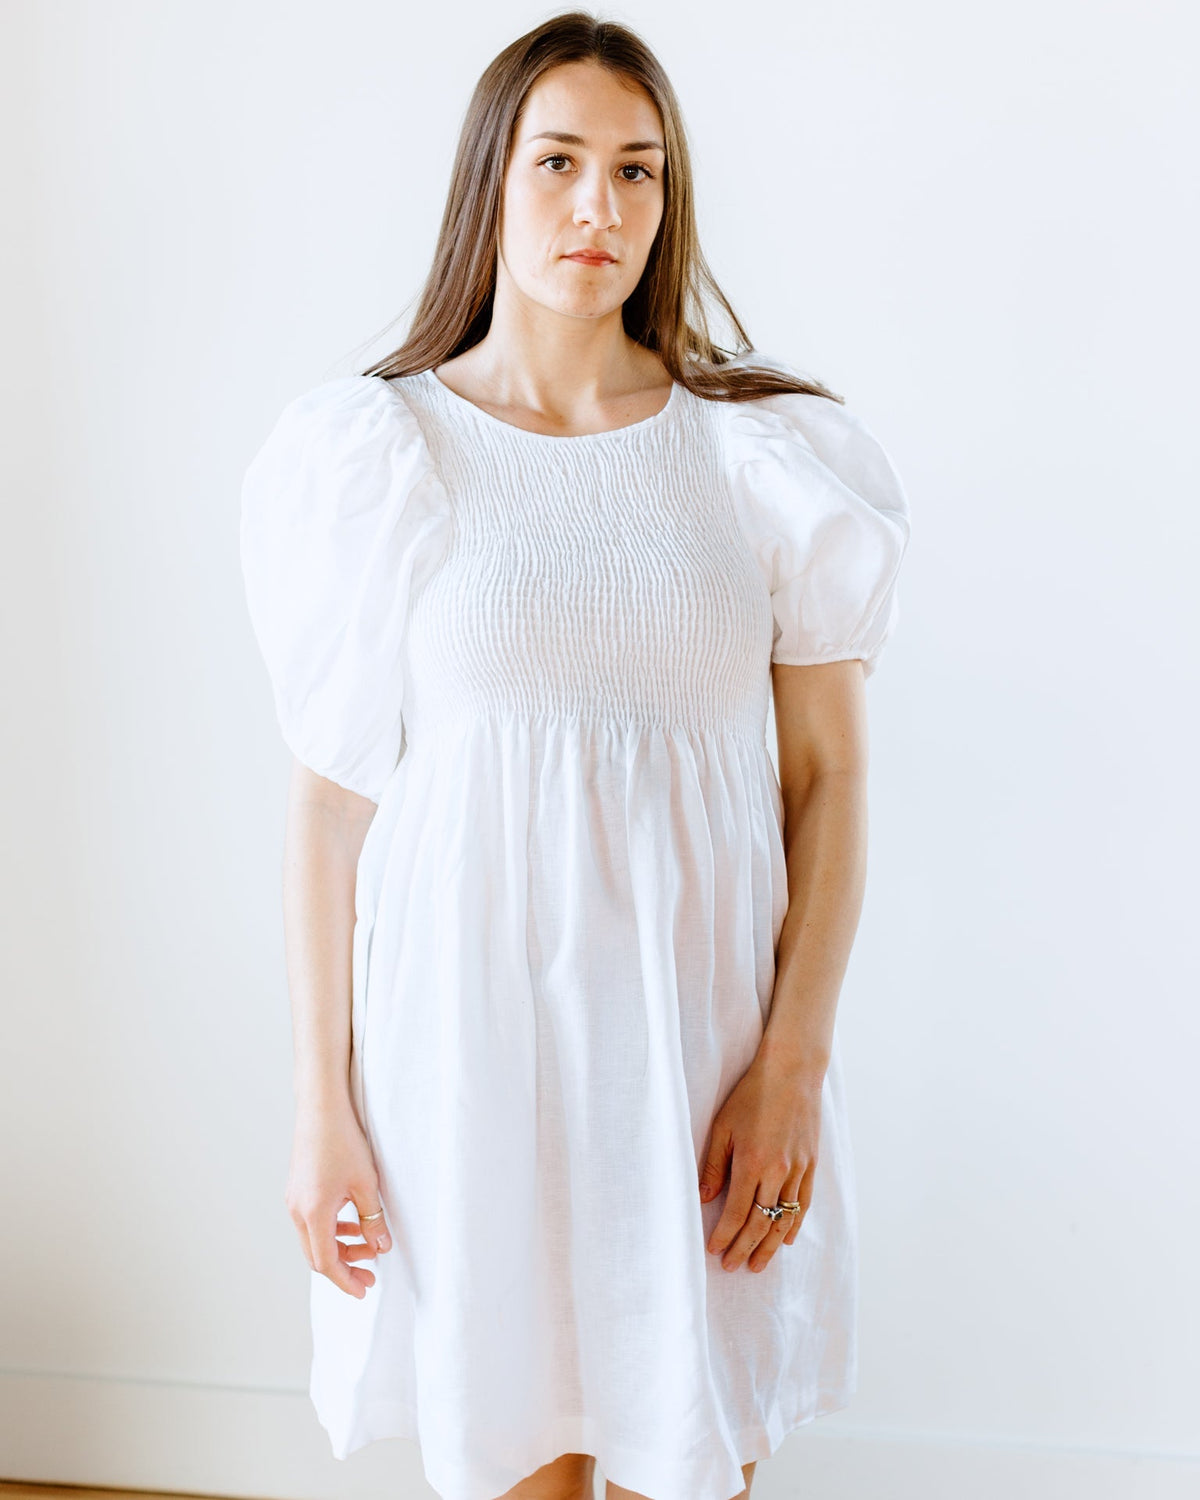 Beaumont Organic Clothing Layrah-May Linen Dress in White